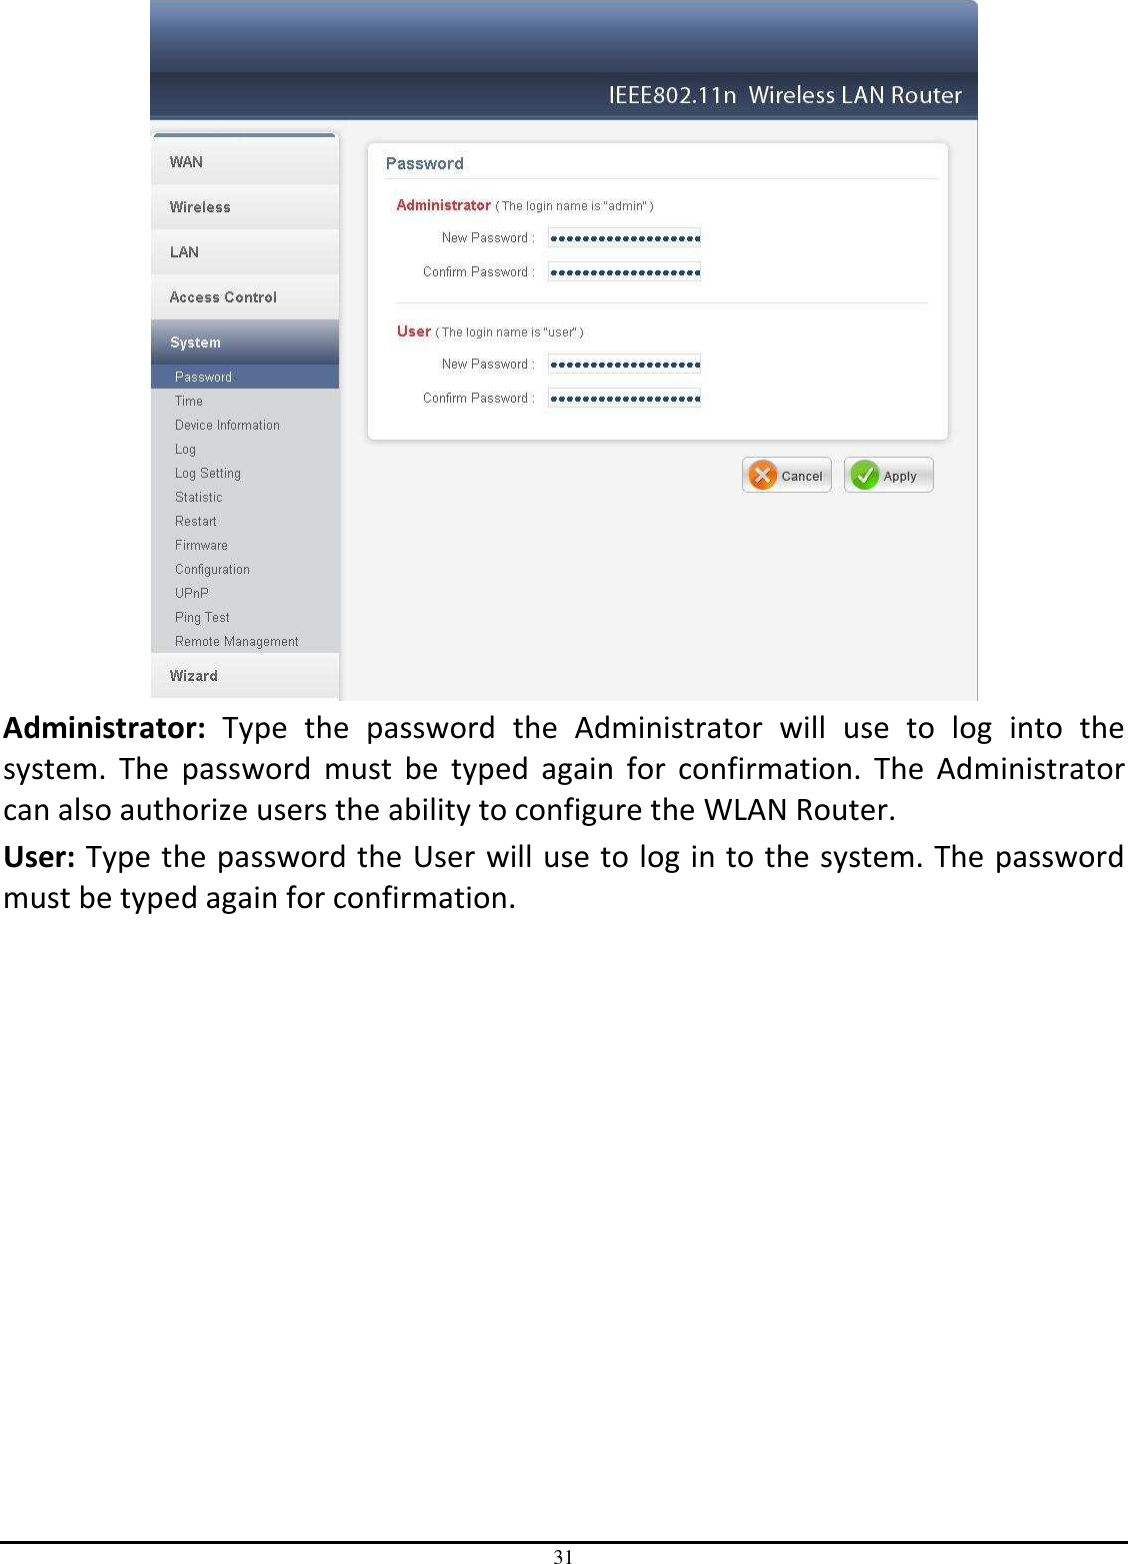 31  Administrator:  Type  the  password  the  Administrator  will  use  to  log  into  the system.  The  password  must  be  typed  again  for  confirmation.  The  Administrator can also authorize users the ability to configure the WLAN Router. User: Type the password the User will use to log in to the system. The password must be typed again for confirmation.  